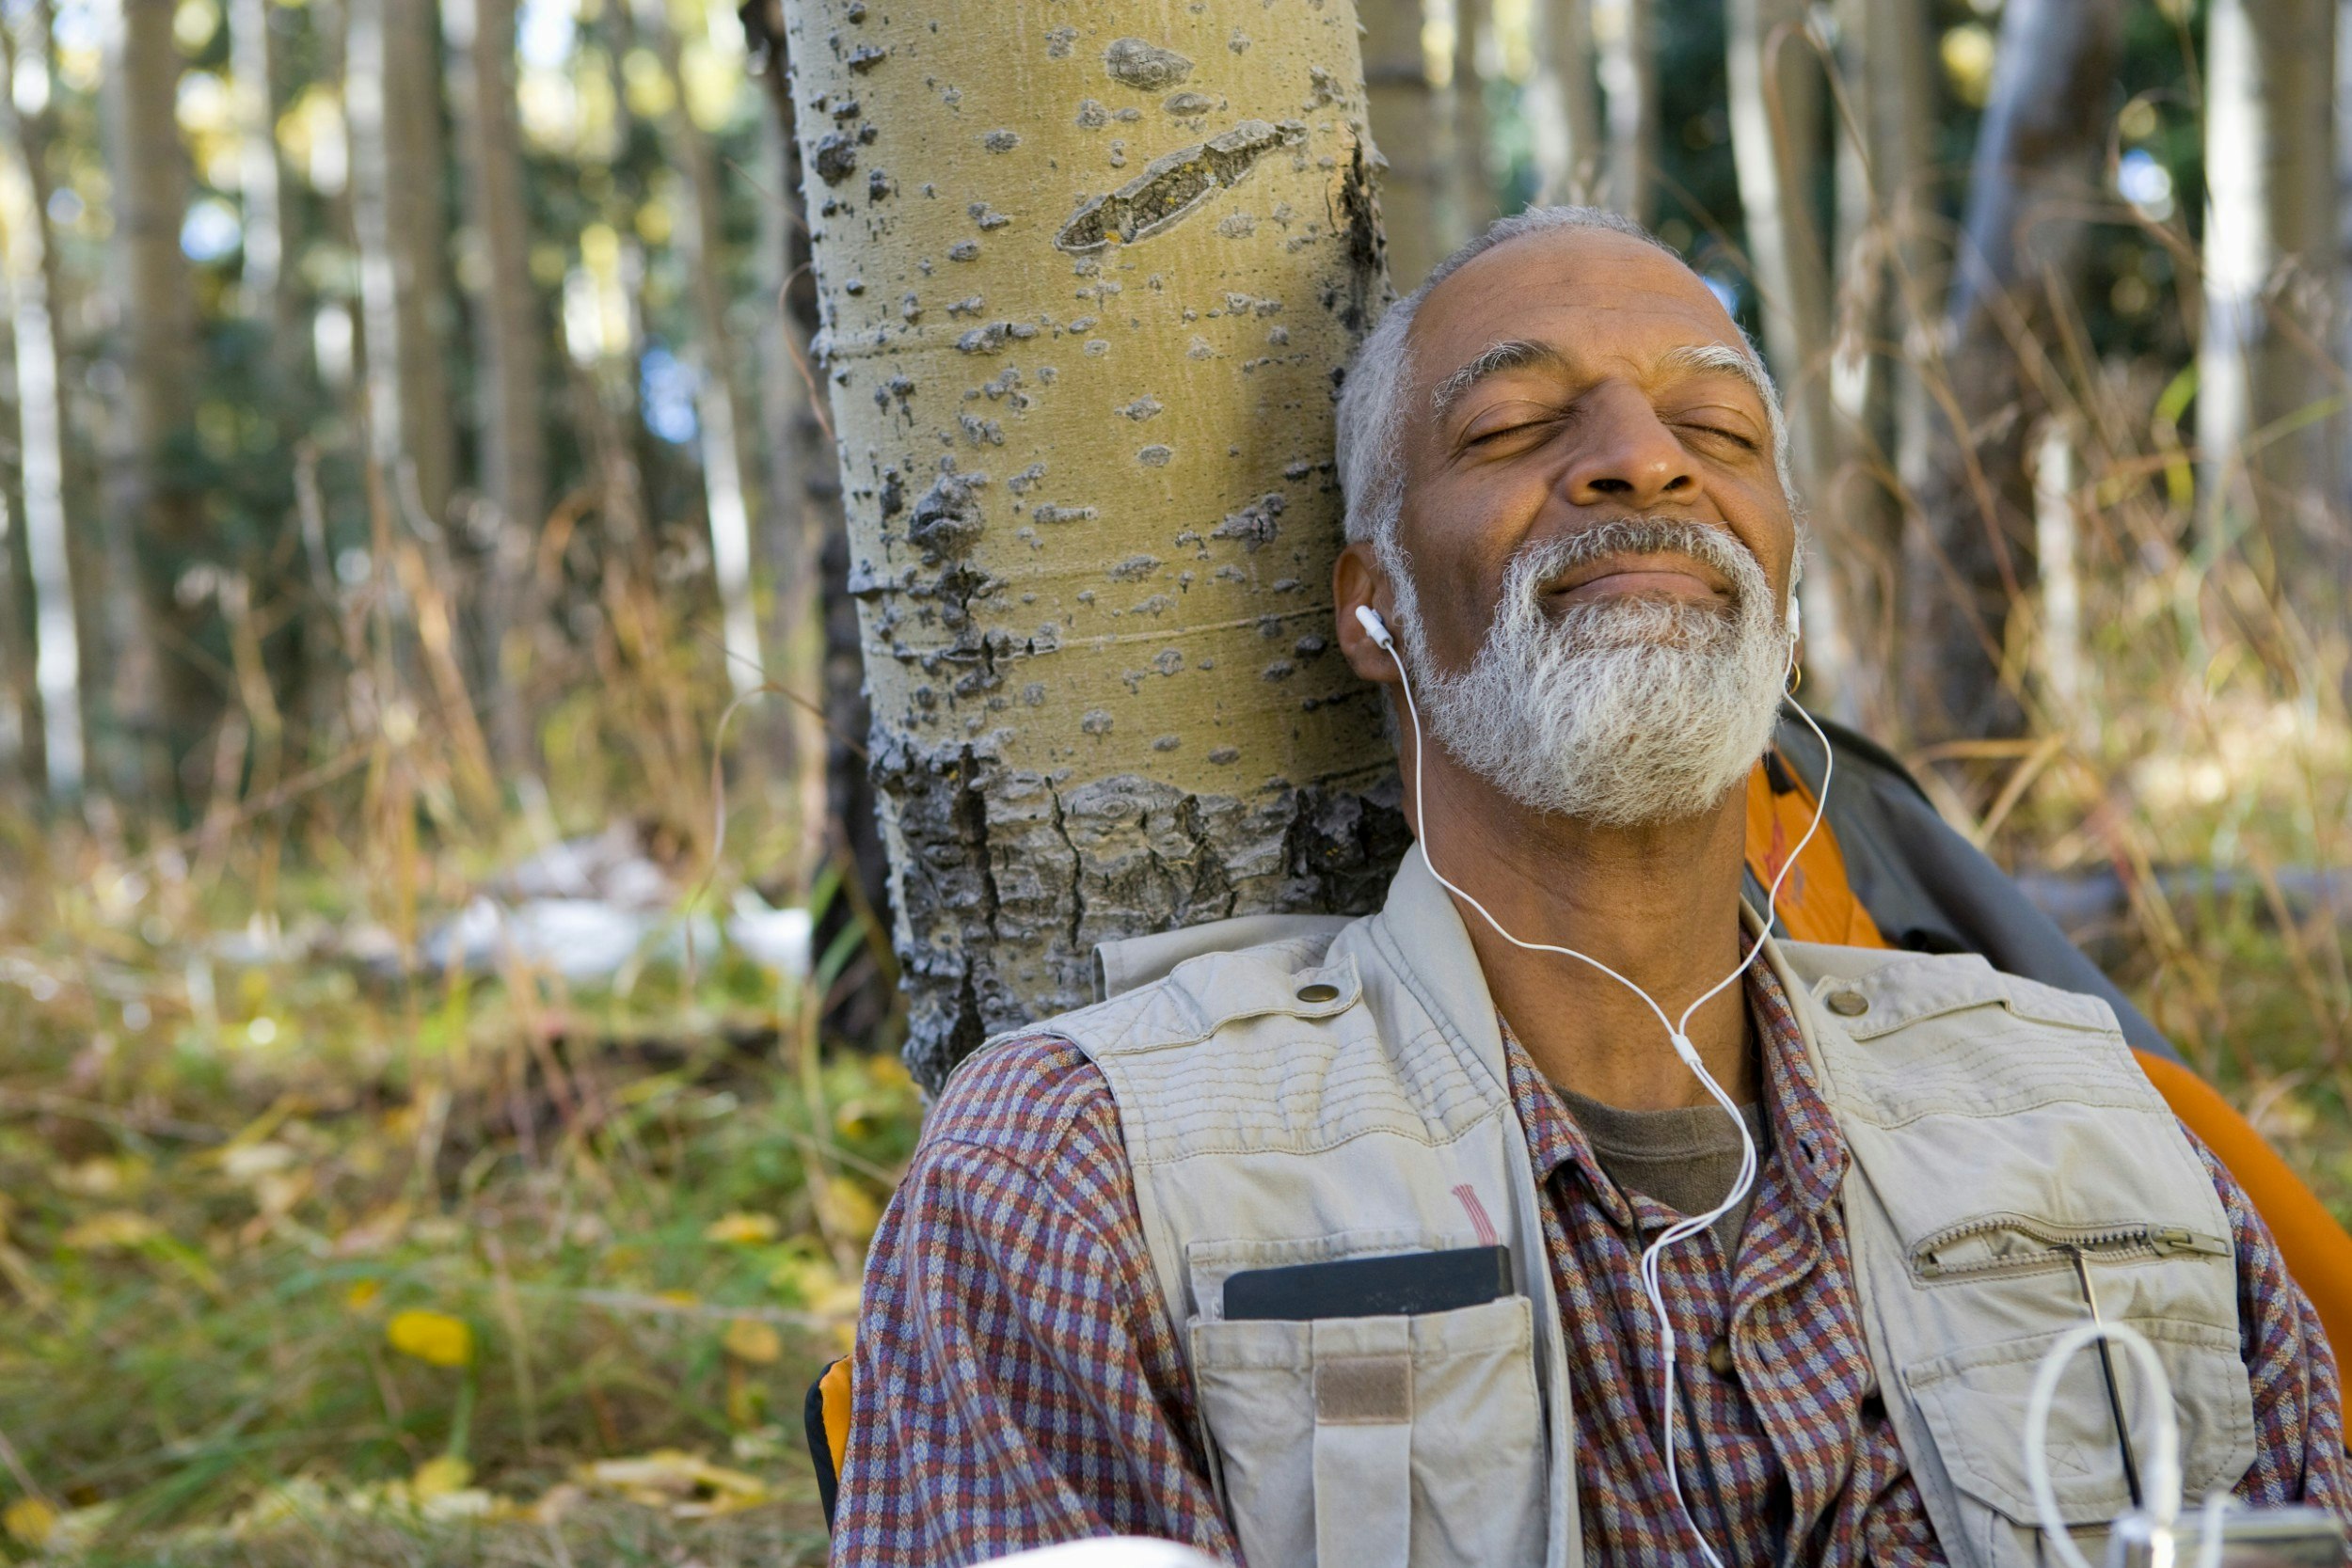 A hiker with a beard listening to music in the wood